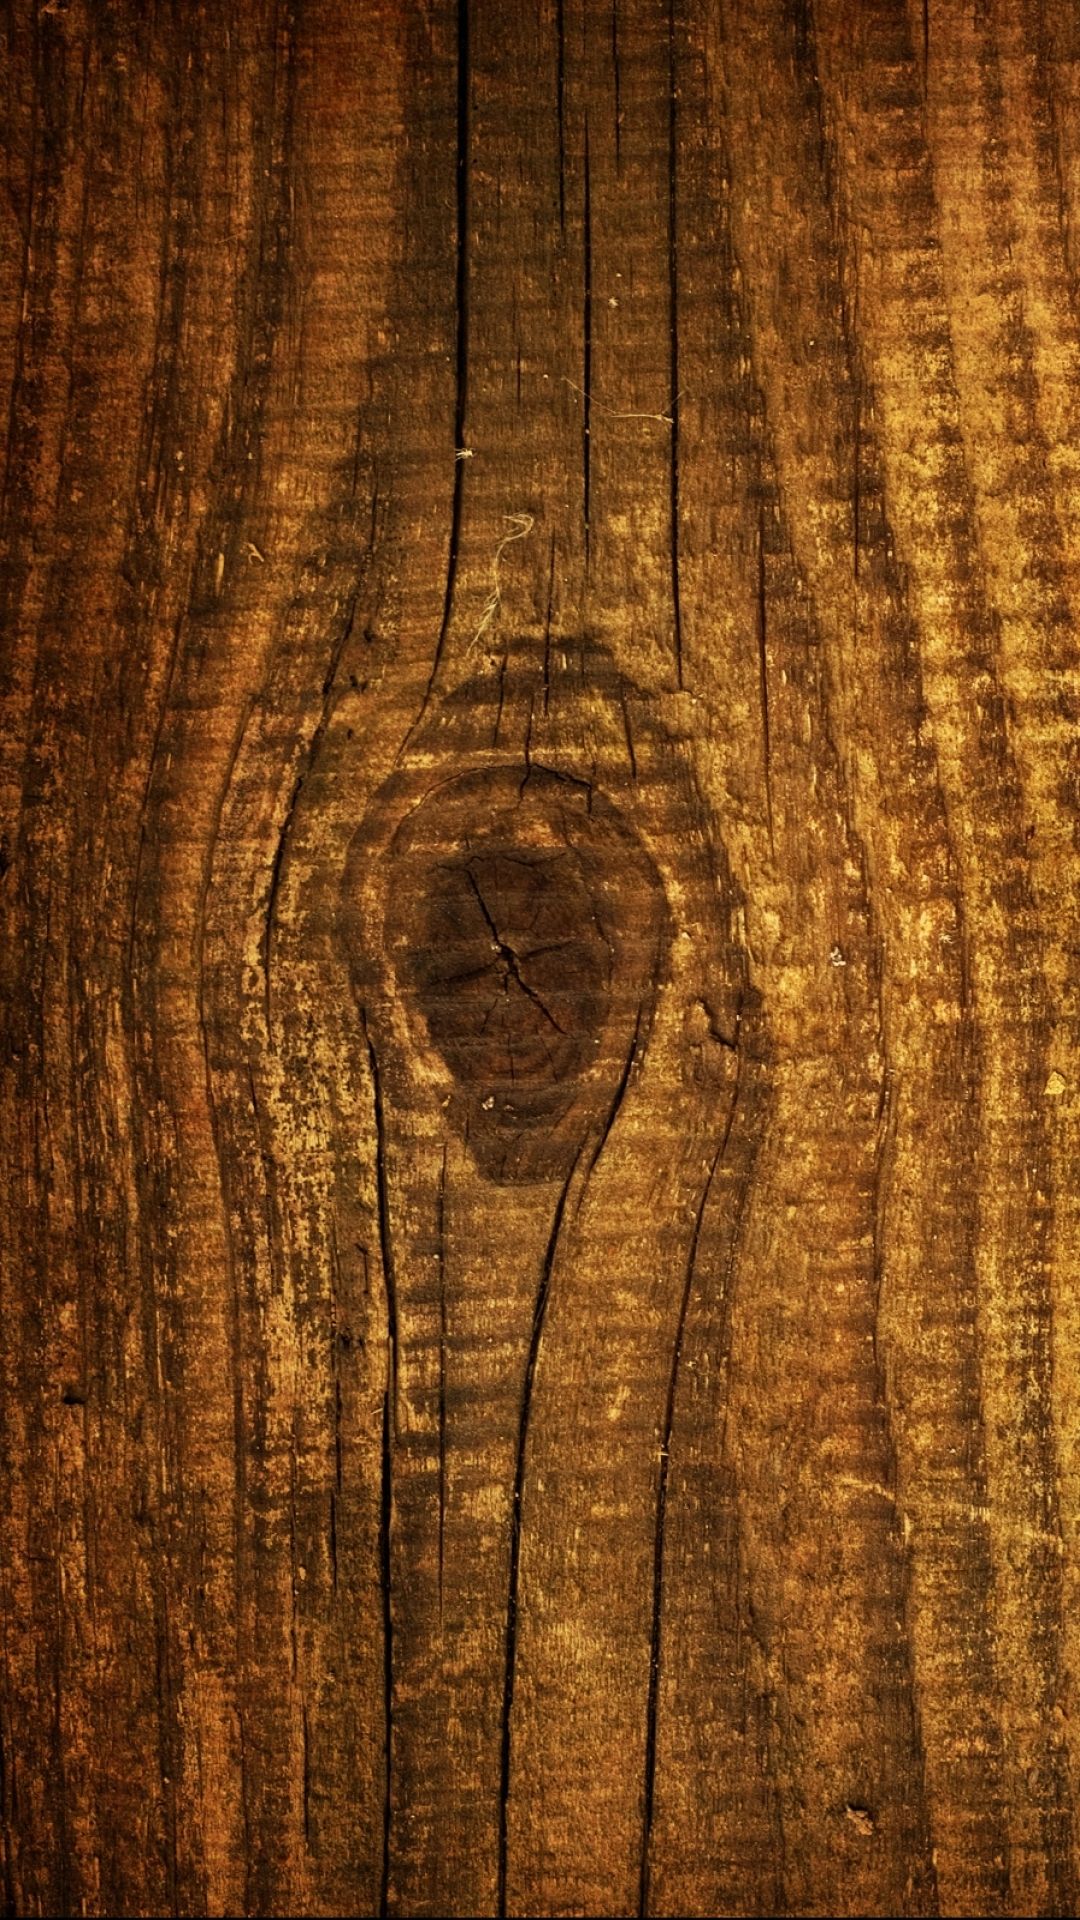 Download wallpaper 800x1200 wood planks parquet texture surface iphone  4s4 for parallax hd background